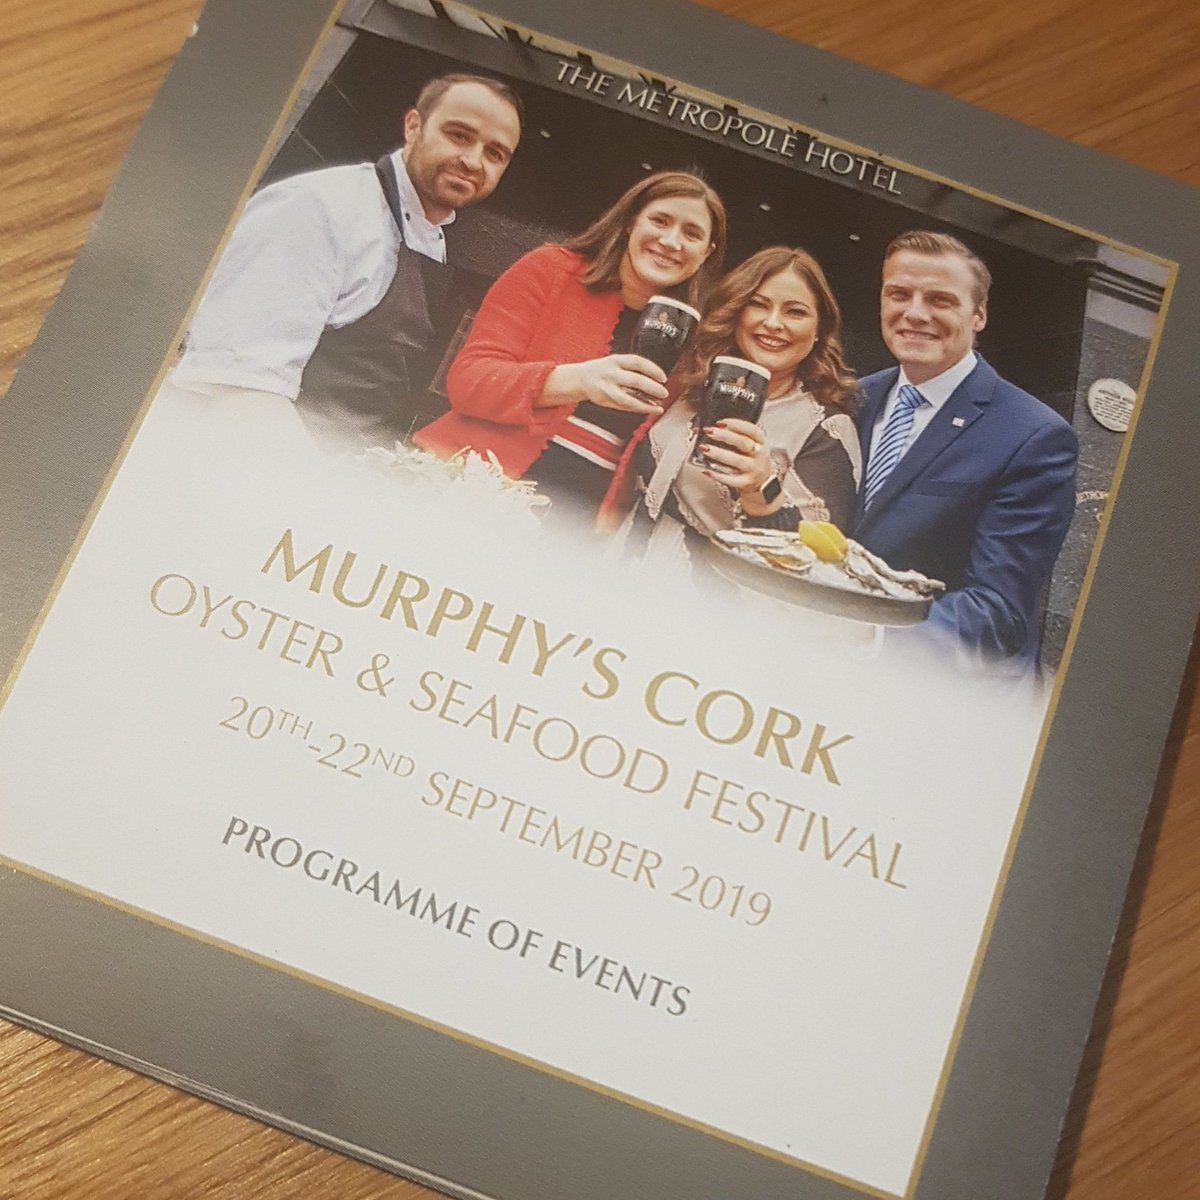 Ah doesn't our festival programmes look fantastic. The excitement in the #CorkOysterFestival office is off the charts
#Cork #CorkEvents #Oyster #OysterLovers #OysterShucking #Festival #FoodEvent #Food #Seafood #FoodFestival #LiveMusic #Music #MurphysIrishStout